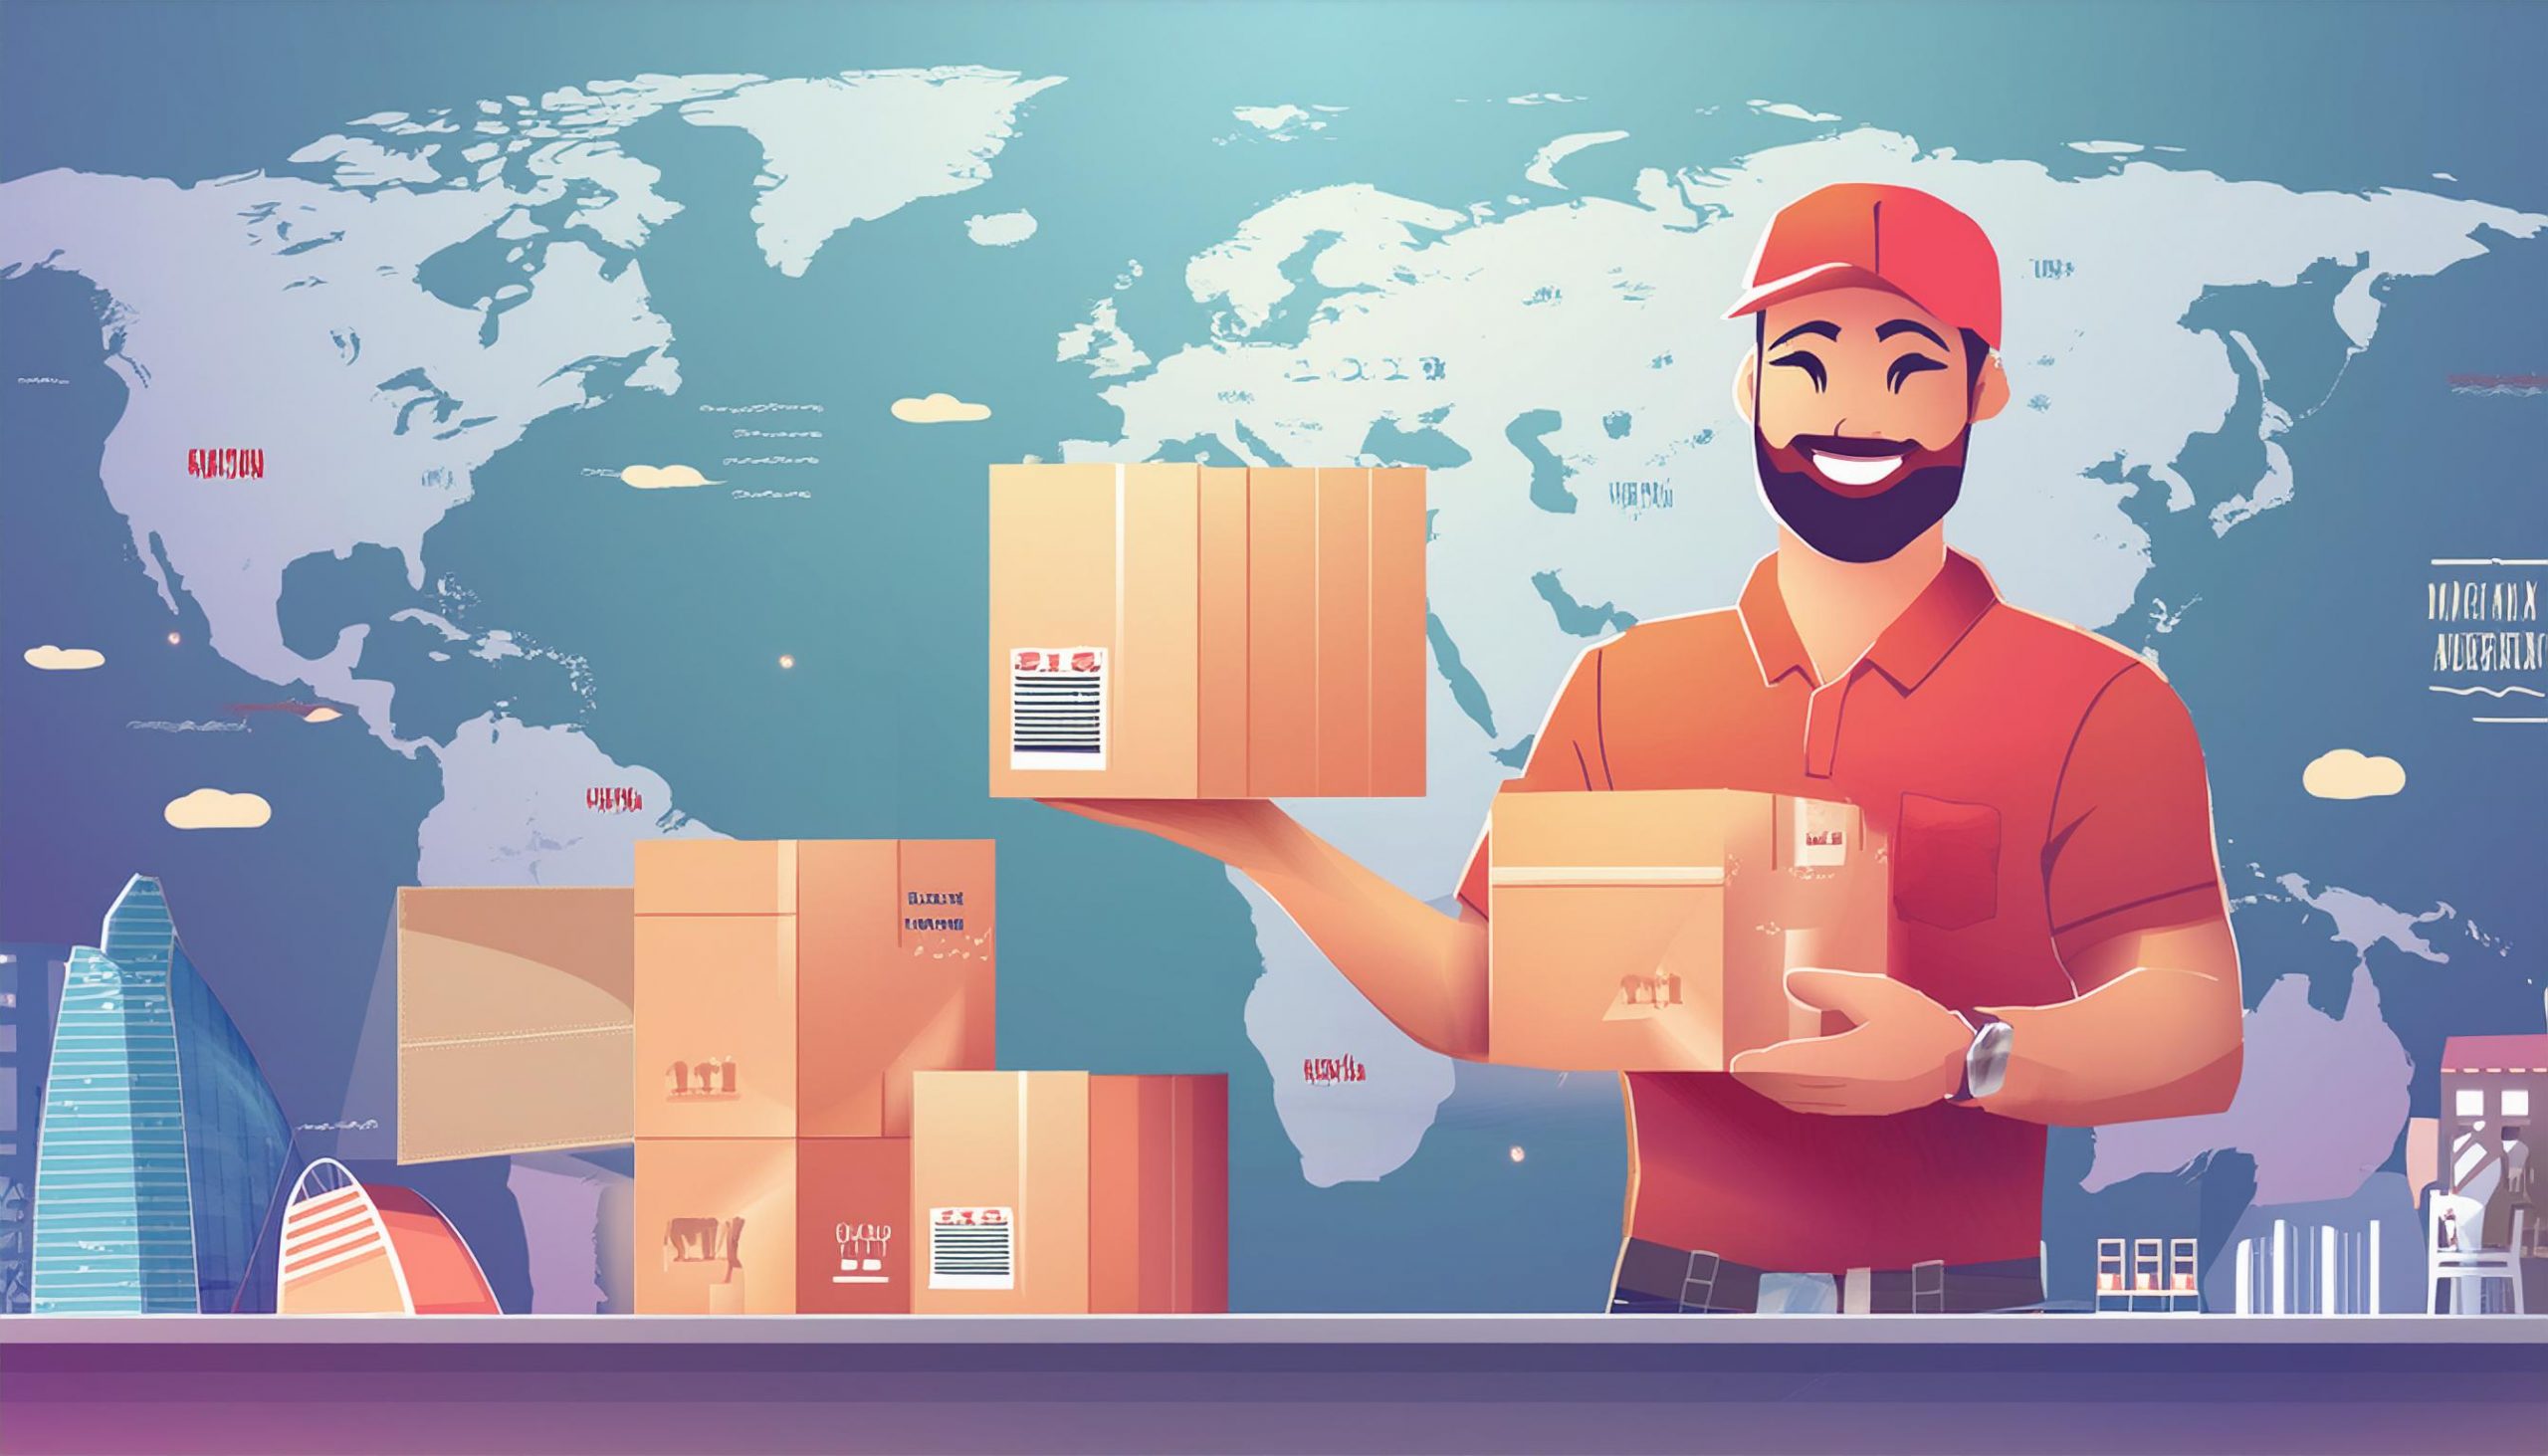 Illustration depicting a happy customer receiving a package from a Mexico-based parcel forwarder, with symbols of online shopping and global shipping routes in the background.